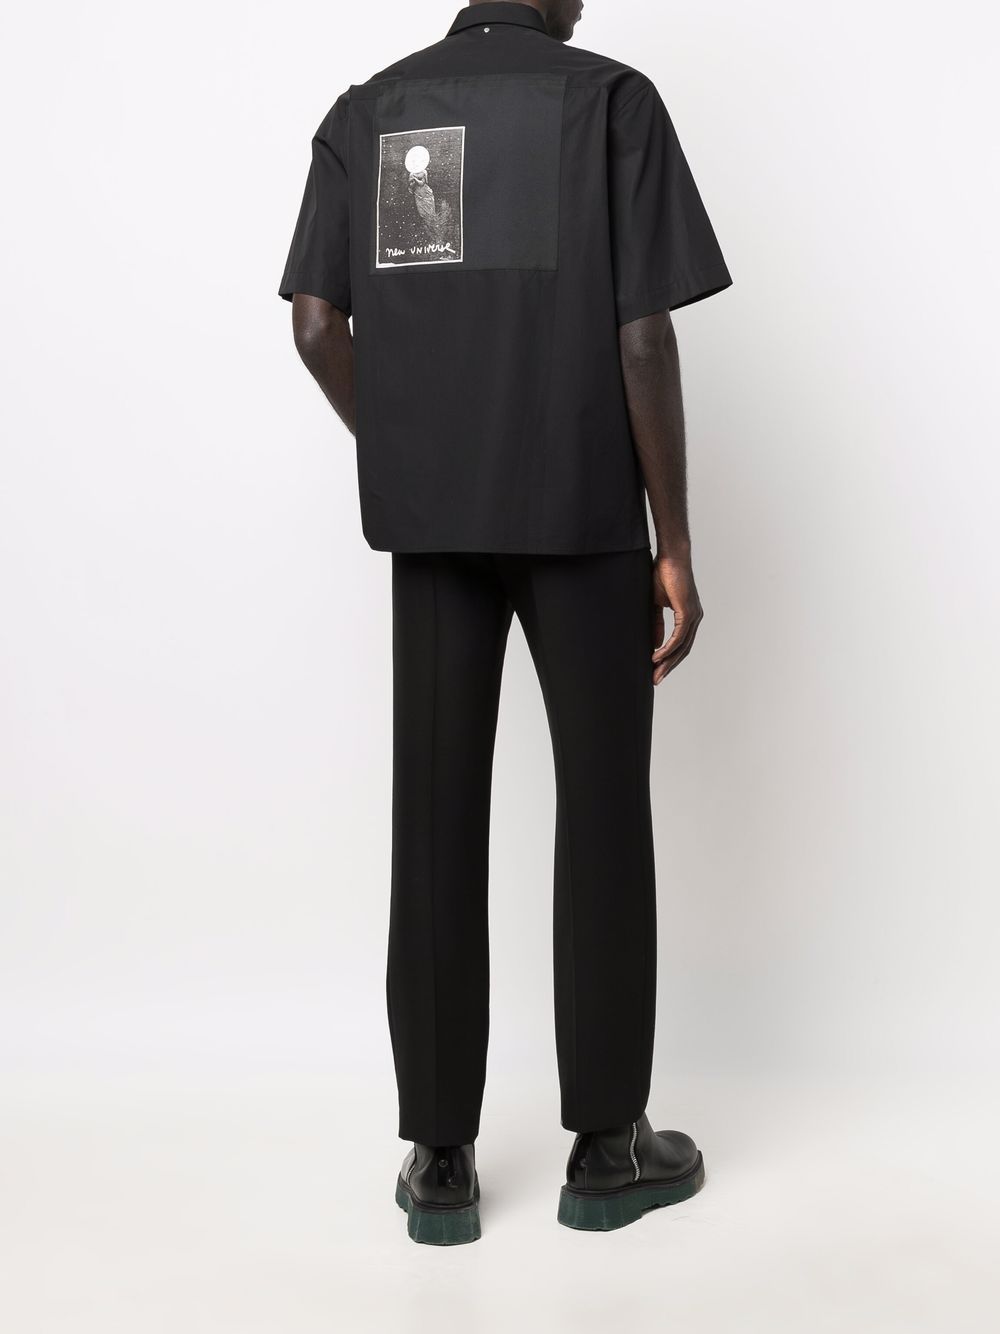 Shop OAMC short-sleeved silk shirt with Express Delivery - FARFETCH